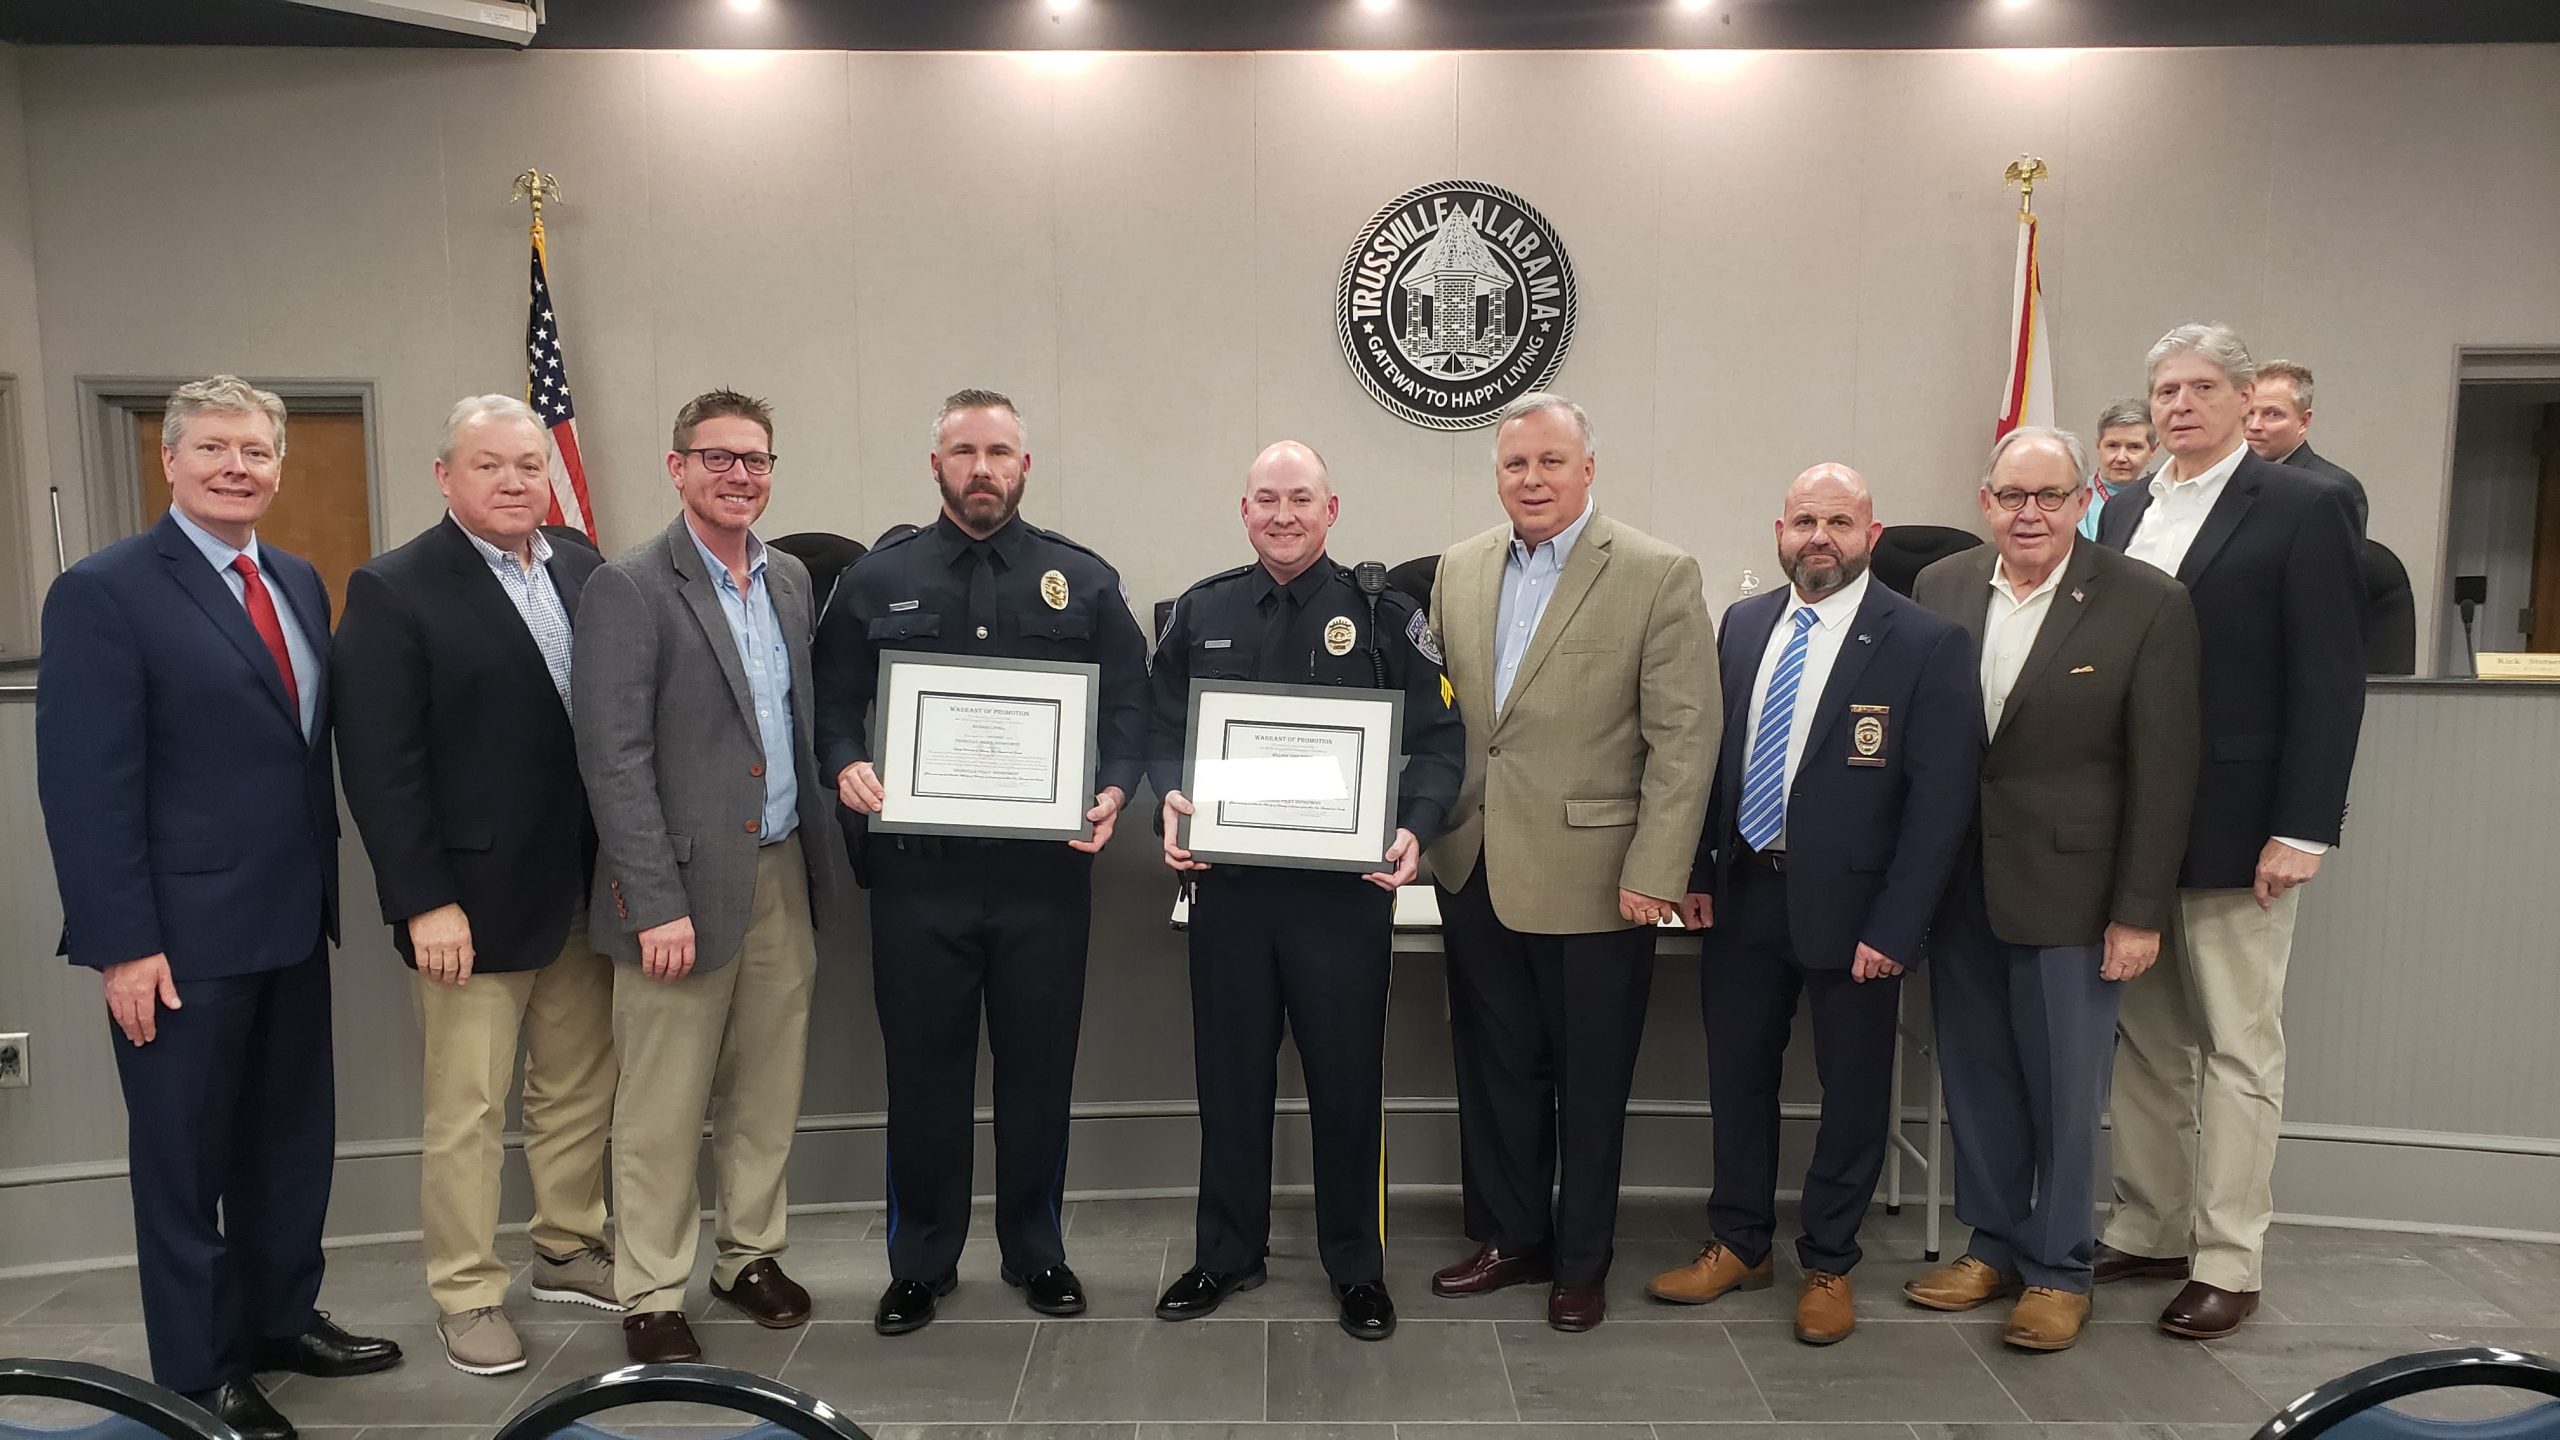 2 Trussville officers promoted at City Council meeting, new fiber option coming soon to Trussville